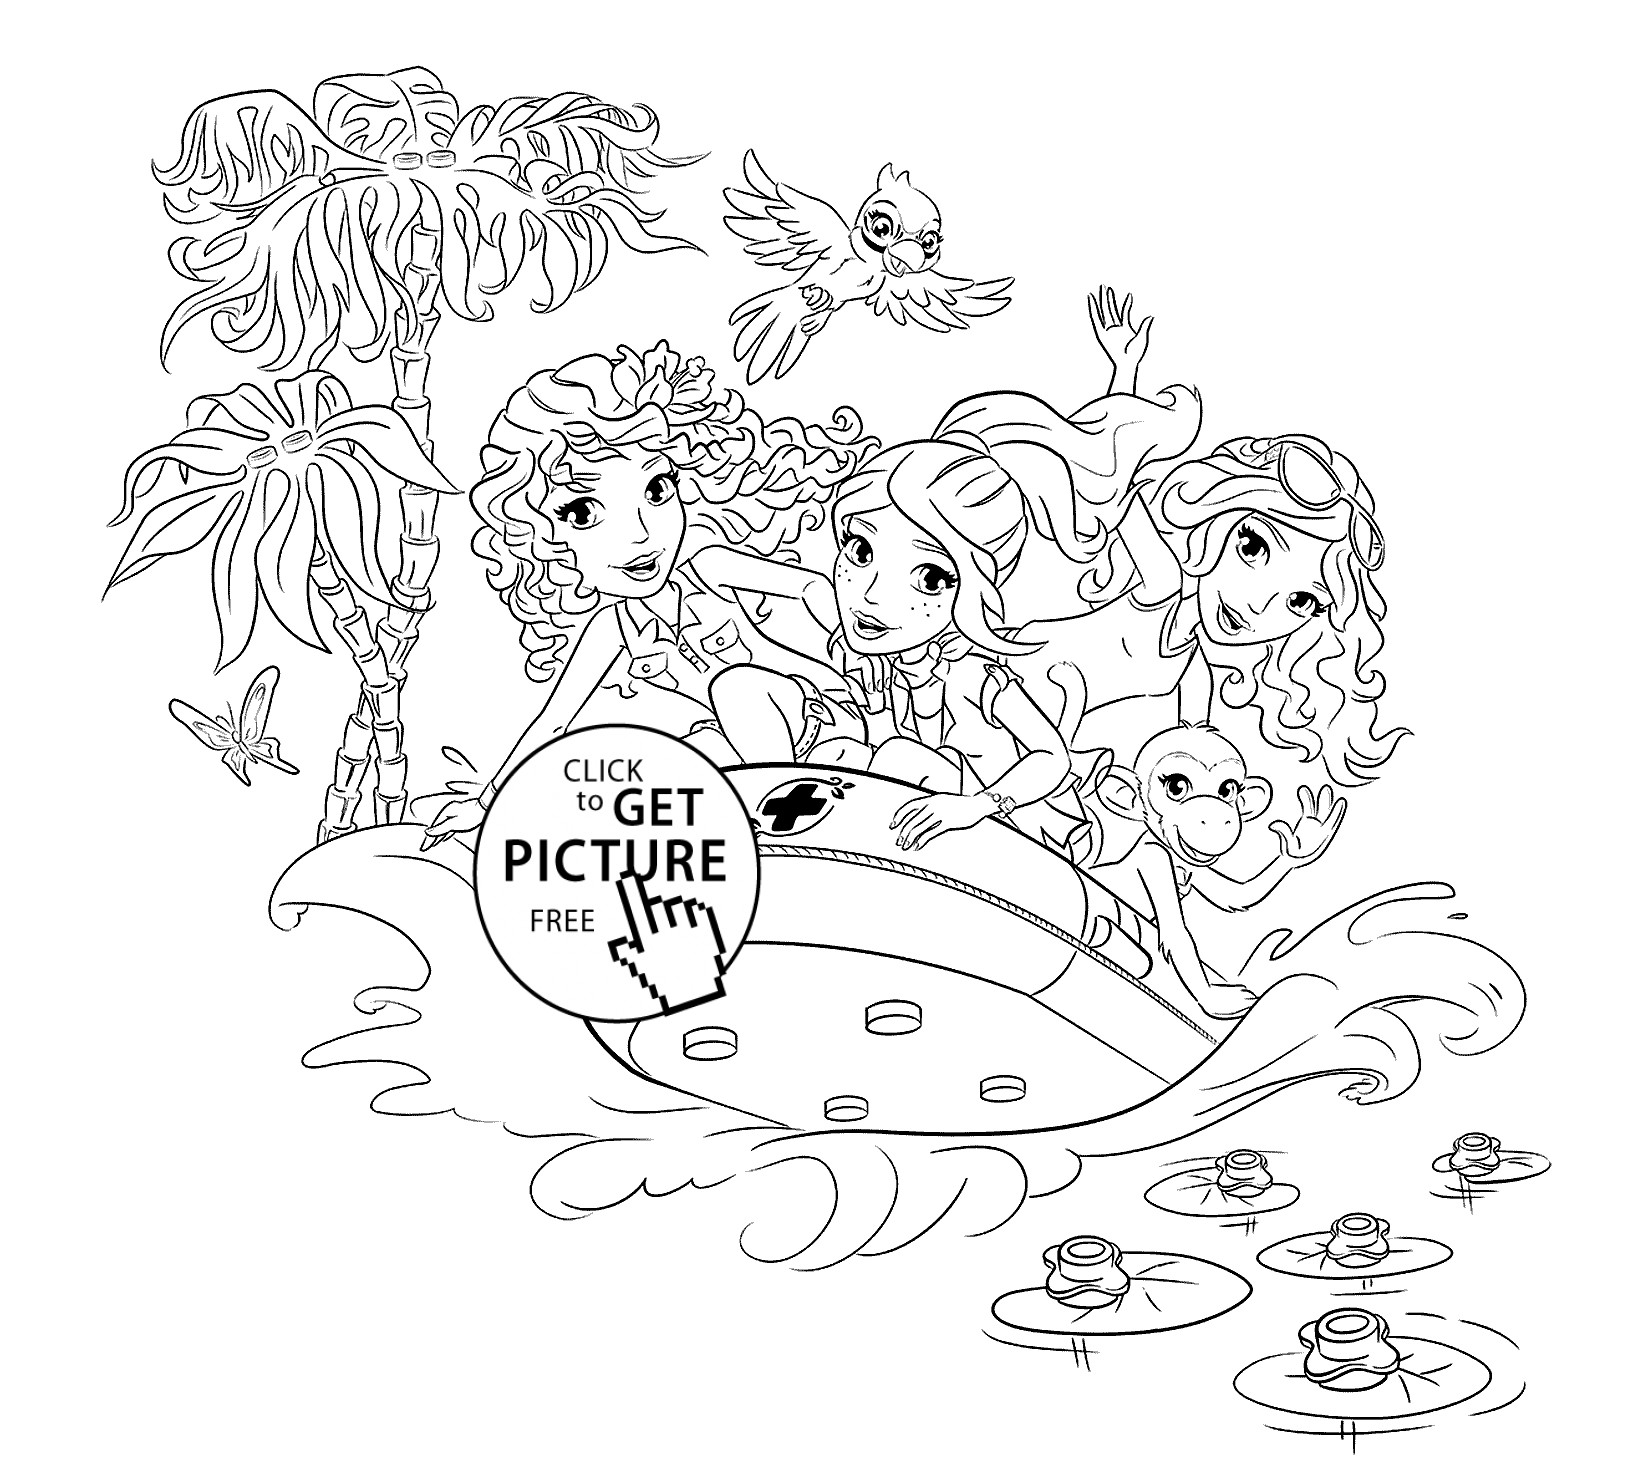 Printable Lego Coloring Sheets For Girls
 Lego rubber boat coloring page for girls printable free